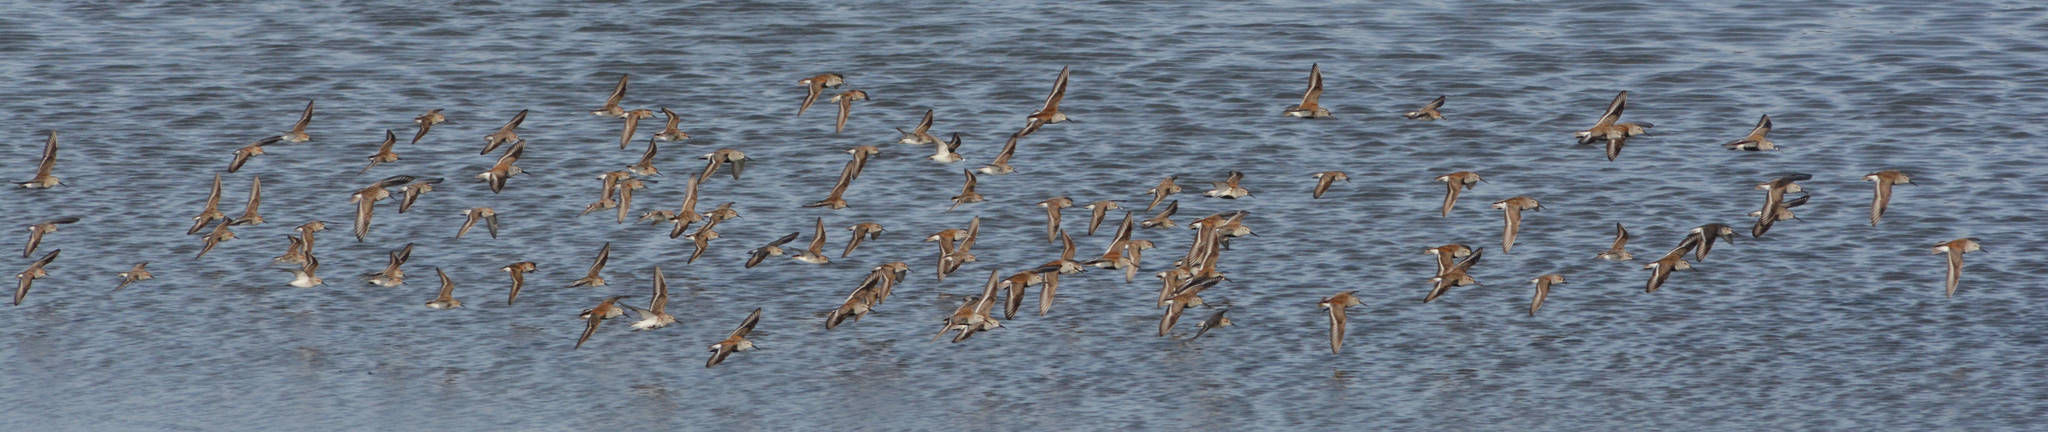 Shorebirds fly on Saturday, May 1, 2021, at Mud Bay near the Homer Spit in Homer, Alaska. The birds were one of several species of shorebirds seen in Mud Bay over the weekend that included bar-tailed godwits, western sandpipers, dunlins, long-billed dowitchers and Pacific plovers. (Photo by Michael Armstrong/Homer News)